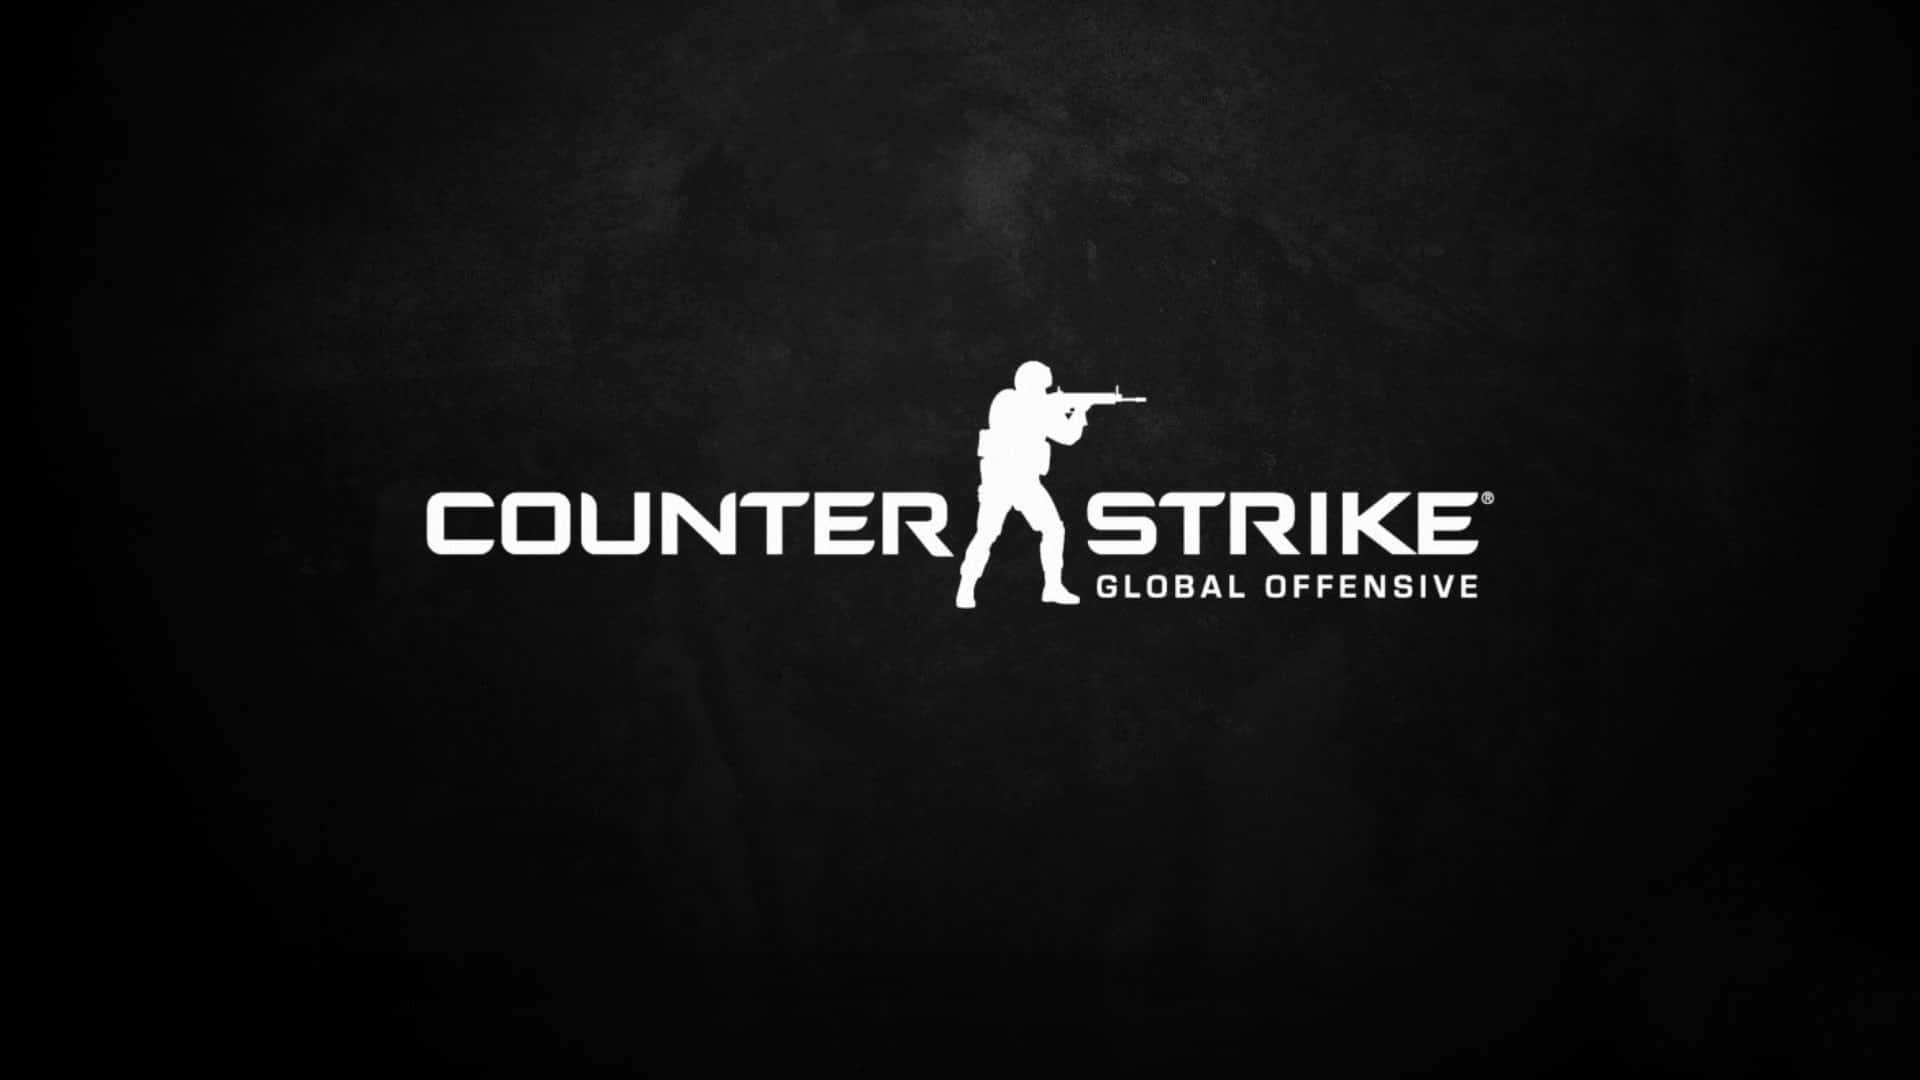 Simple Black Video Game 1080p Counter Strike Global Offensive Background